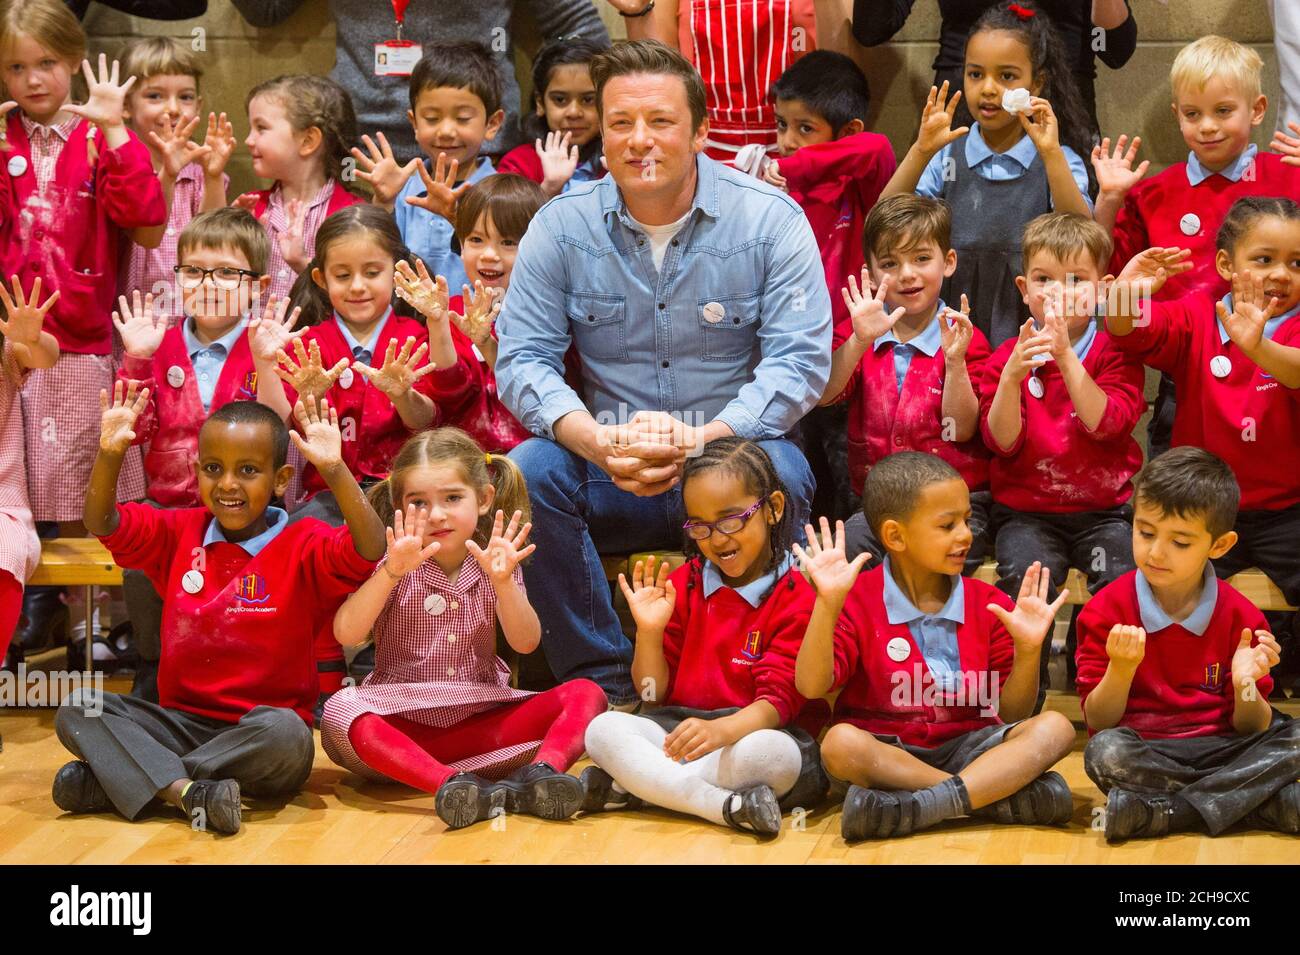 Jamie Oliver with pupils at Kings Cross Academy in London, during a visit on Food Revolution Day, part of the Food Revolution campaign which aims to tackle issues of child nutrition. Stock Photo